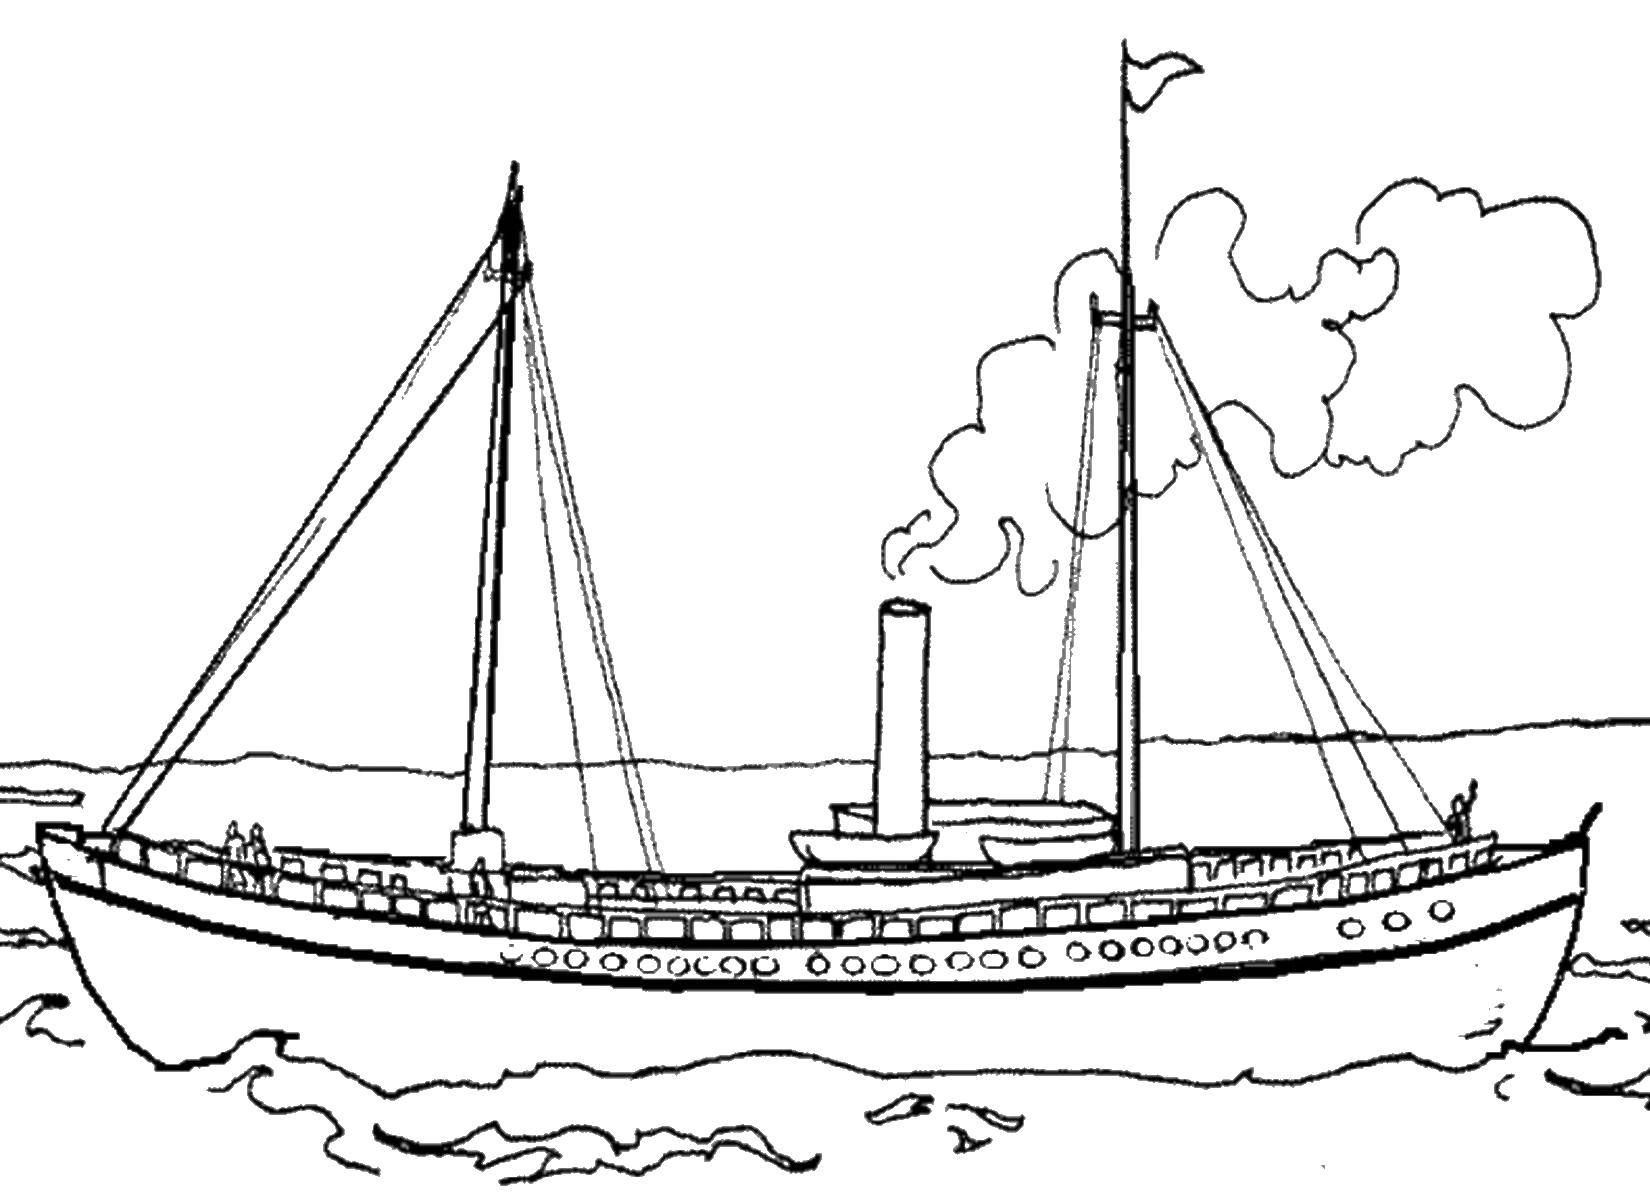 Coloring Steamer. Category ships. Tags:  ship, sea.